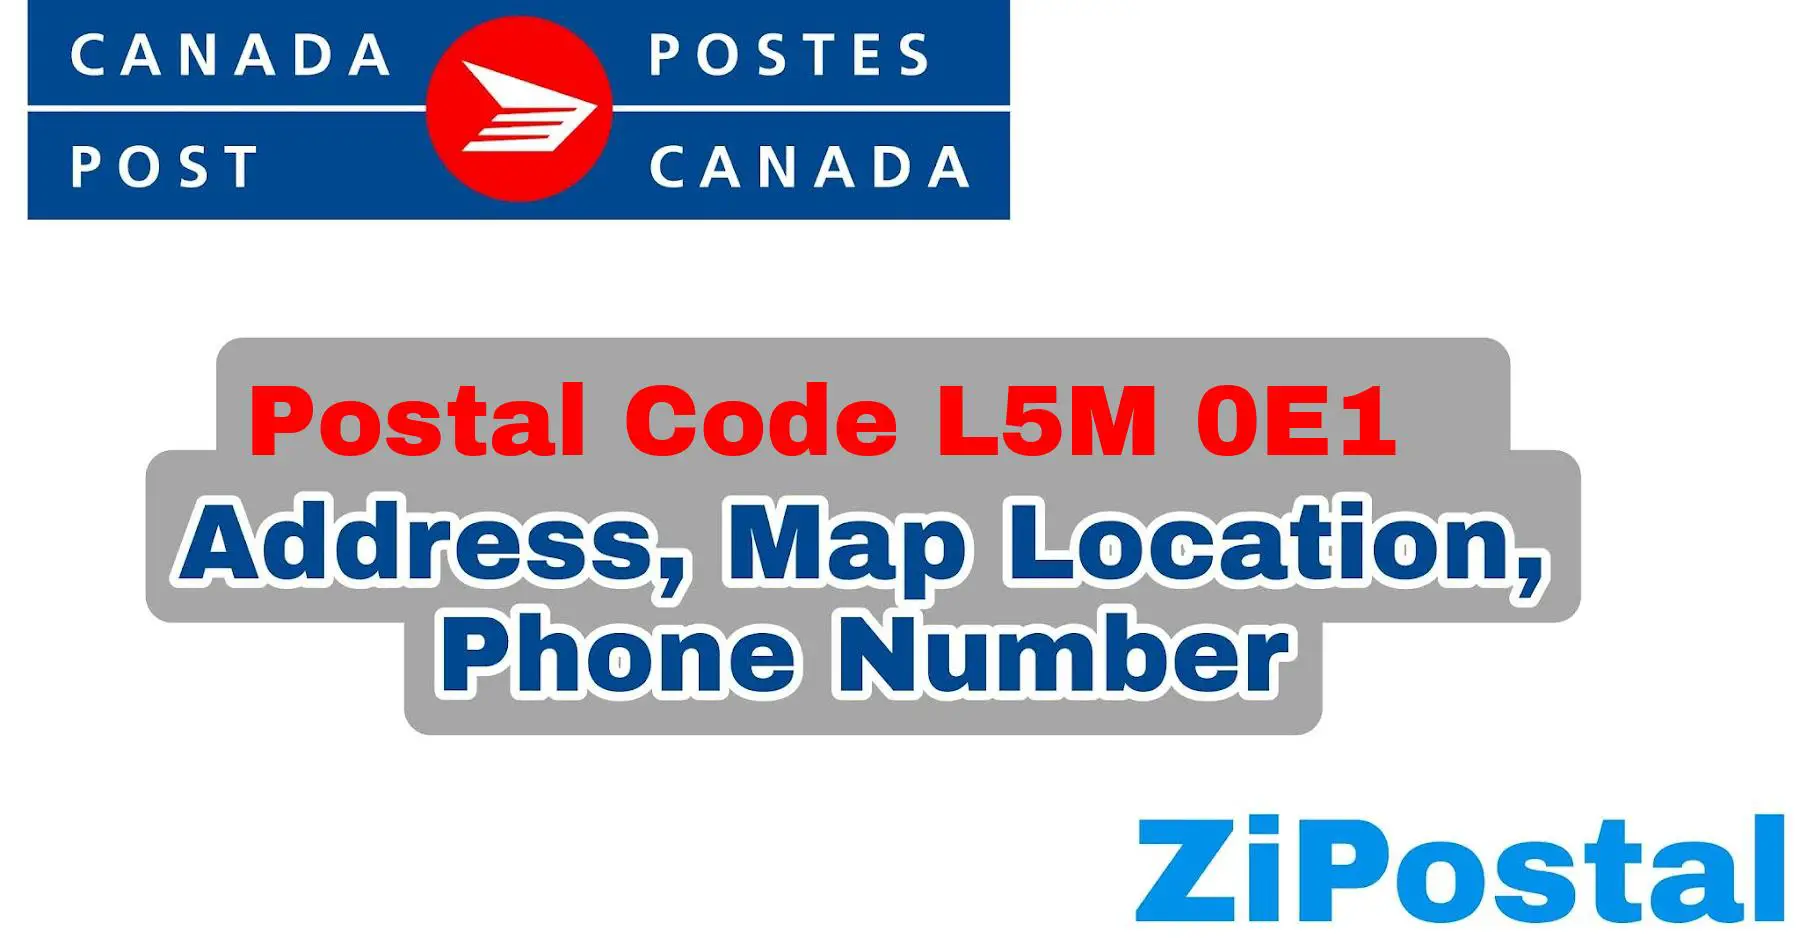 Postal Code L5M 0E1 Address Map Location and Phone Number